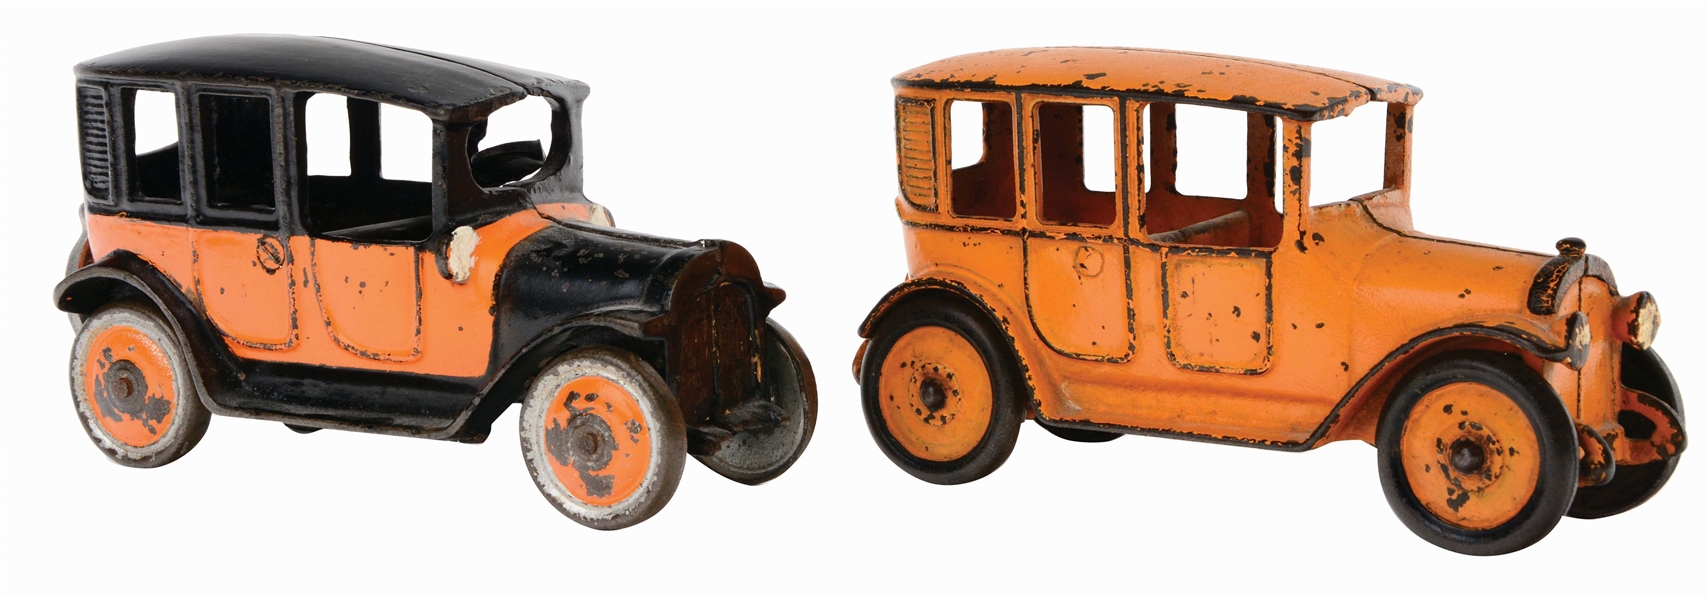 LOT OF 2: CAST-IRON AMERICAN MADE TAXI TOYS.